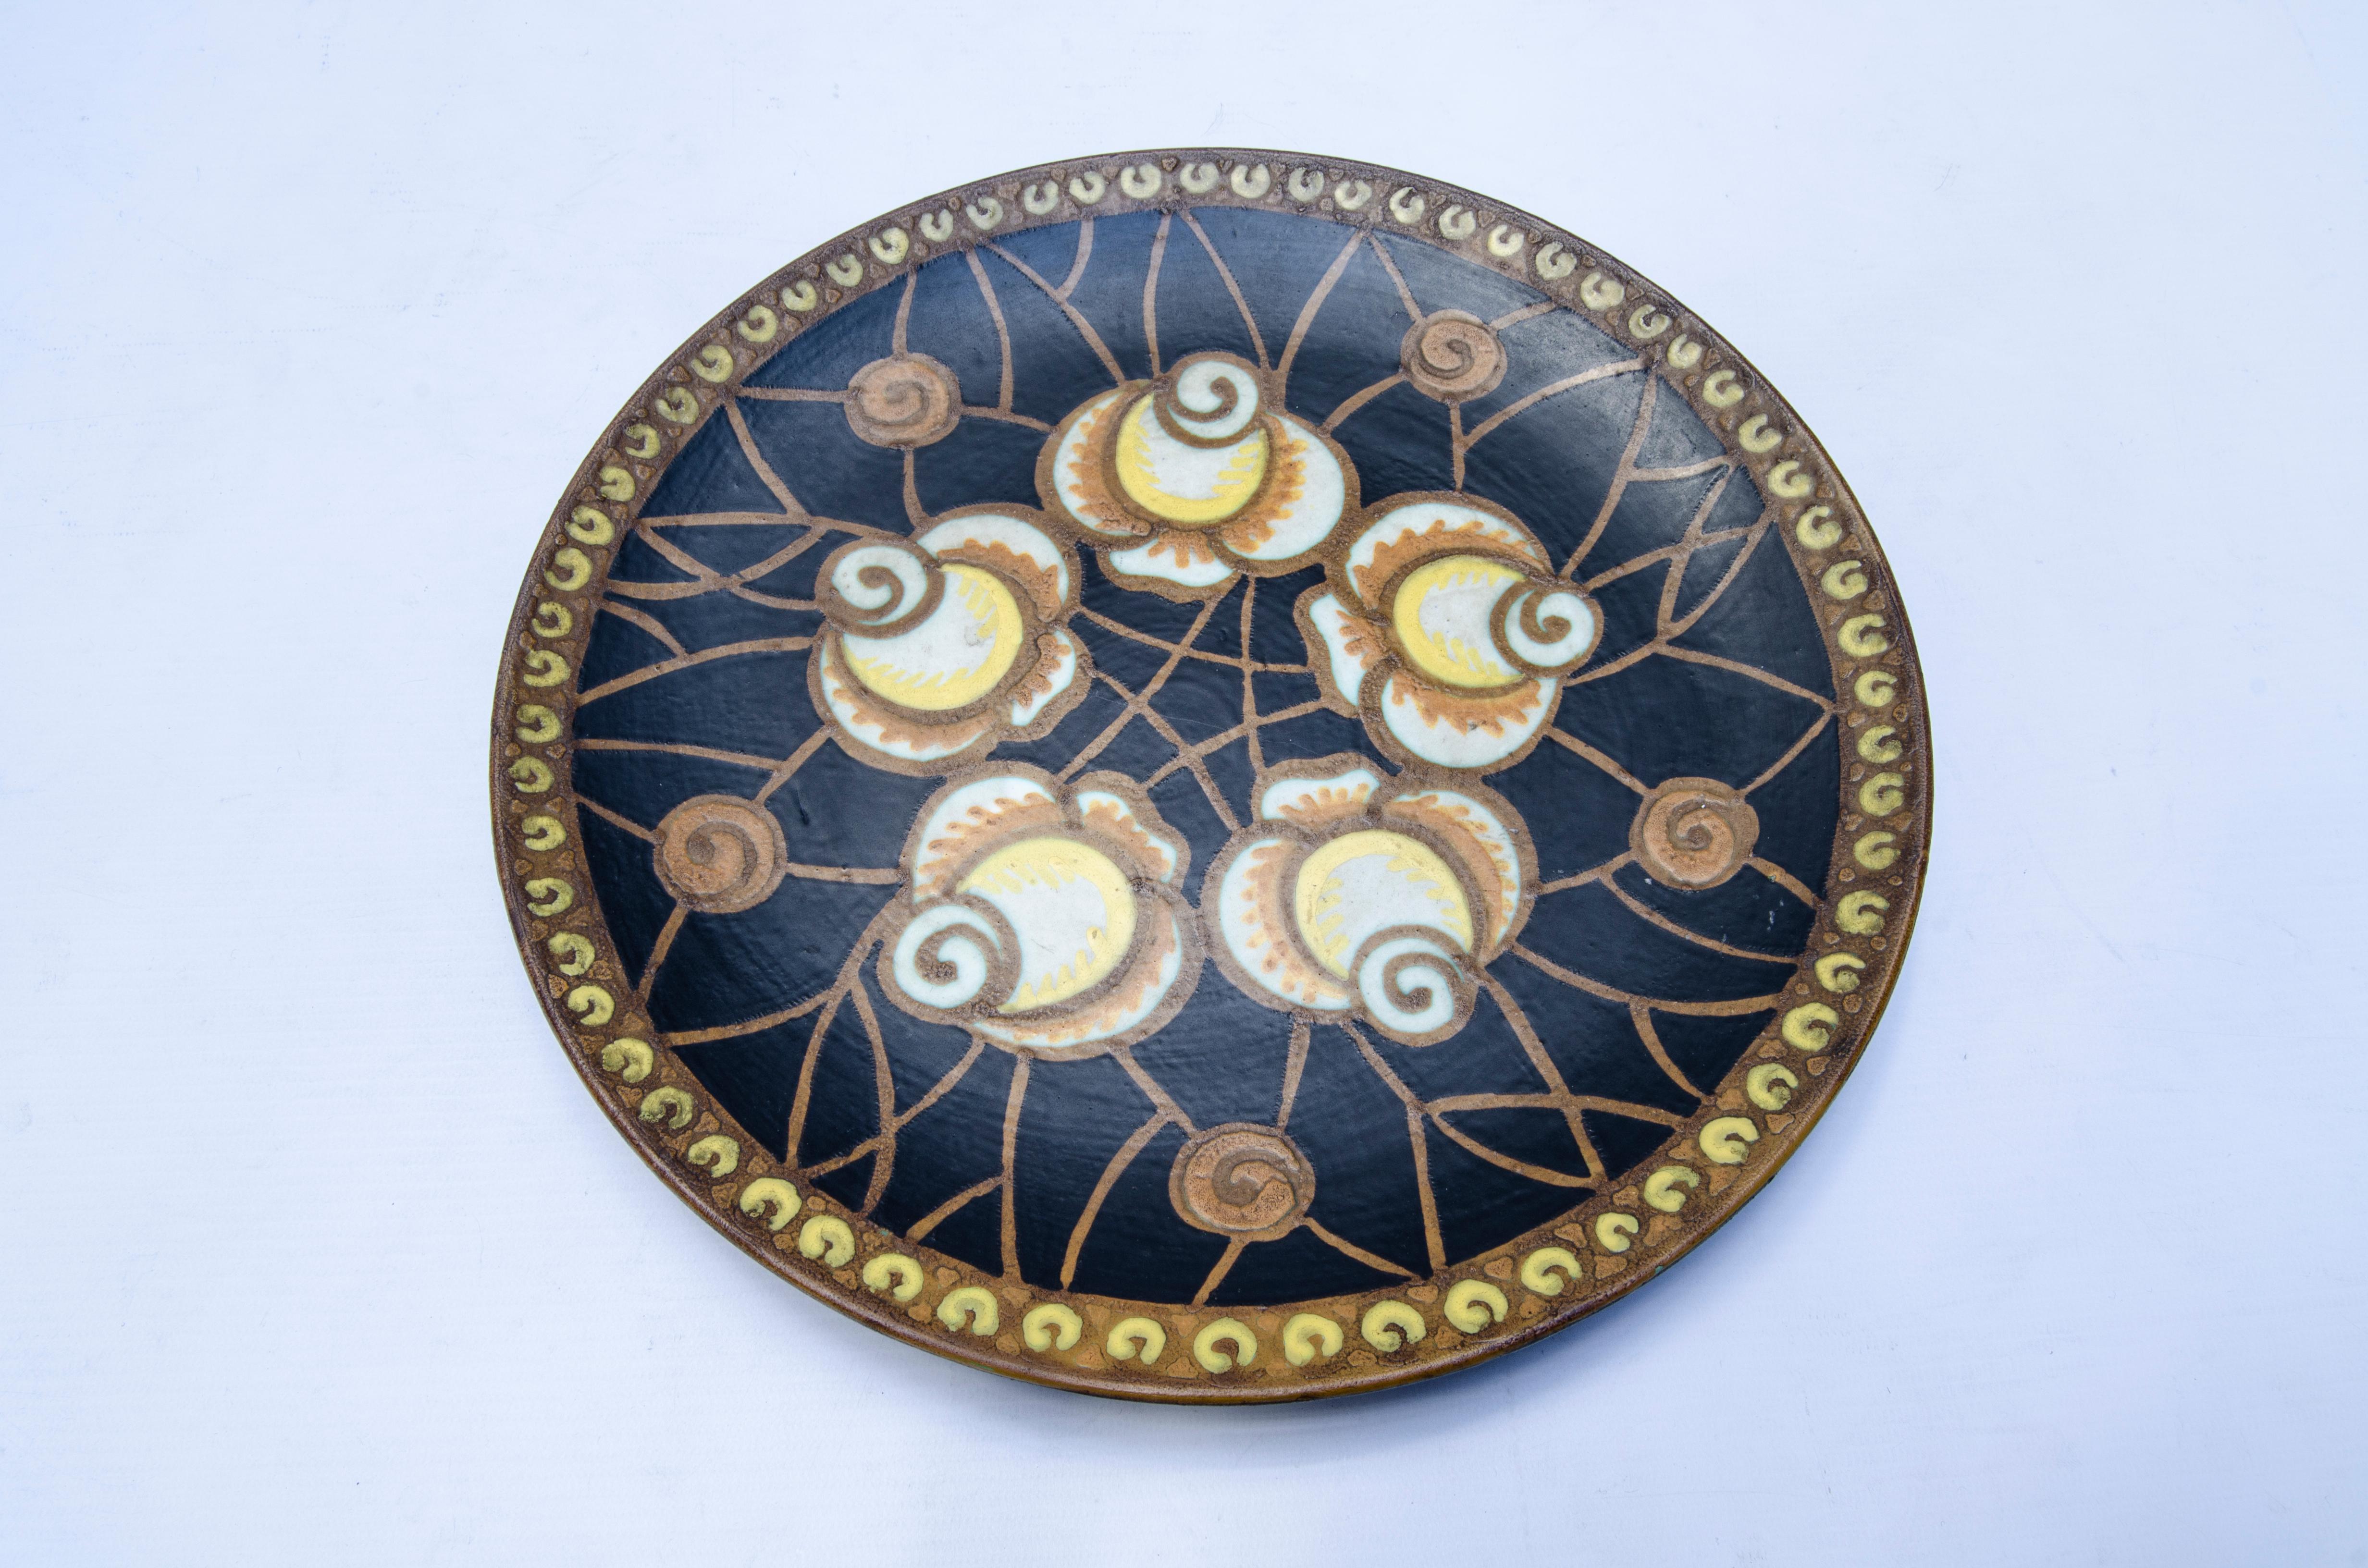 Polychrome ceramic plate with a design of stylized floral motifs in black, yellow, orange, brown and white. This plate is illustrated in: L'homme de Keramis, Charles Catteau de Dominique Corrieras, by Charles Catteau (1880-1966).

Signed CH Catteau,